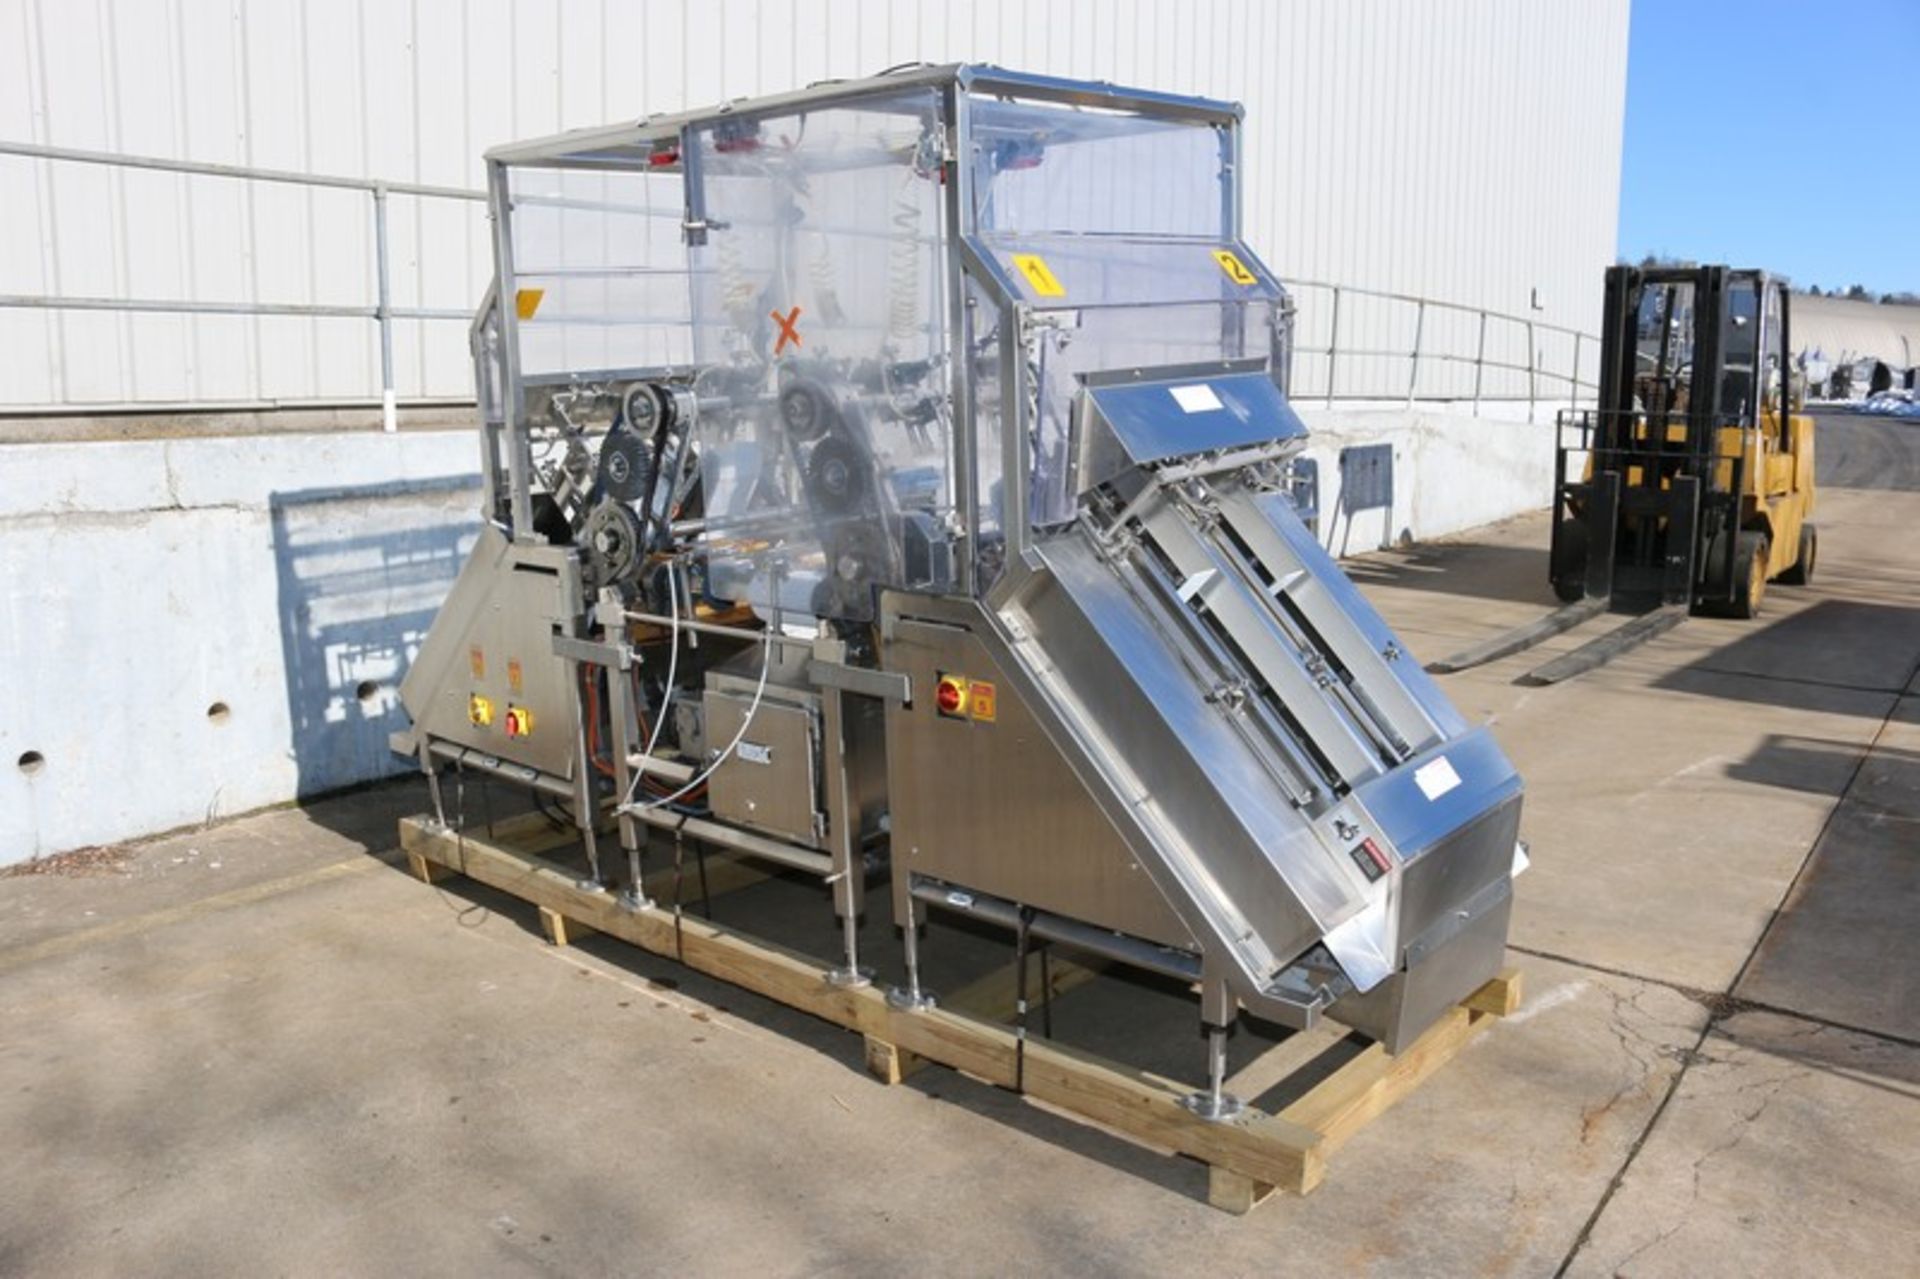 Raque S/S Tray Dispenser,2-Lanes of Aprox. 8" W Outfeed Conveyor, with 4-Head Pick N' Place Vacuum - Image 4 of 11